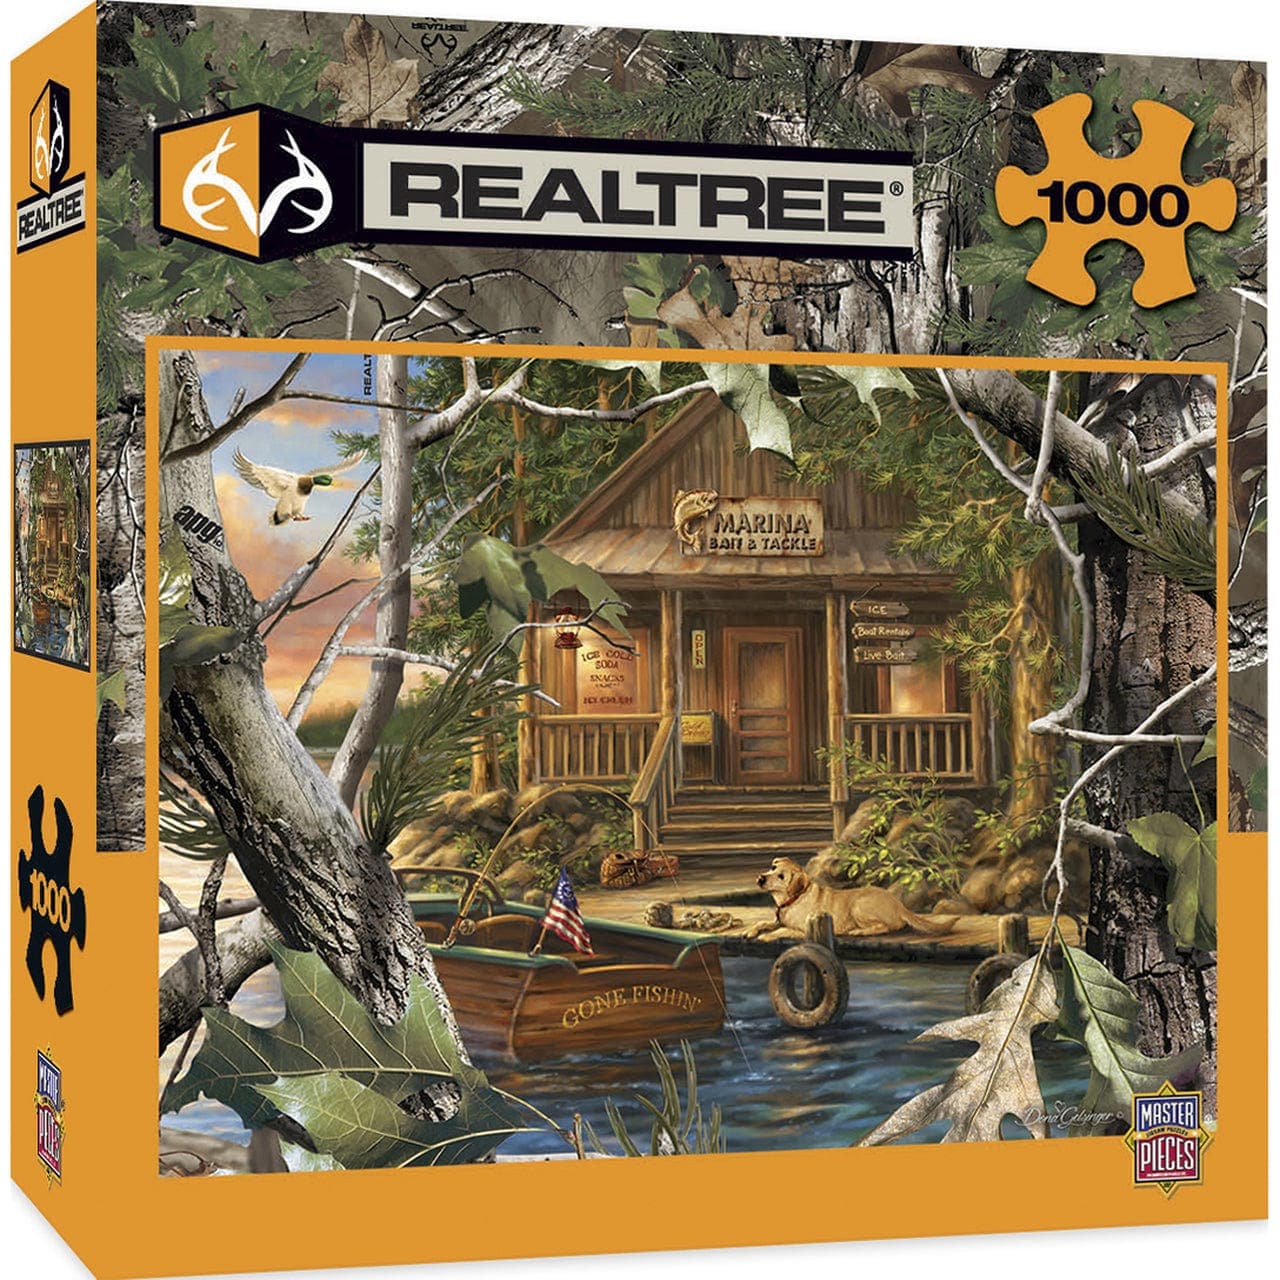 Realtree - Gone Fishing - 1000 Piece Puzzle